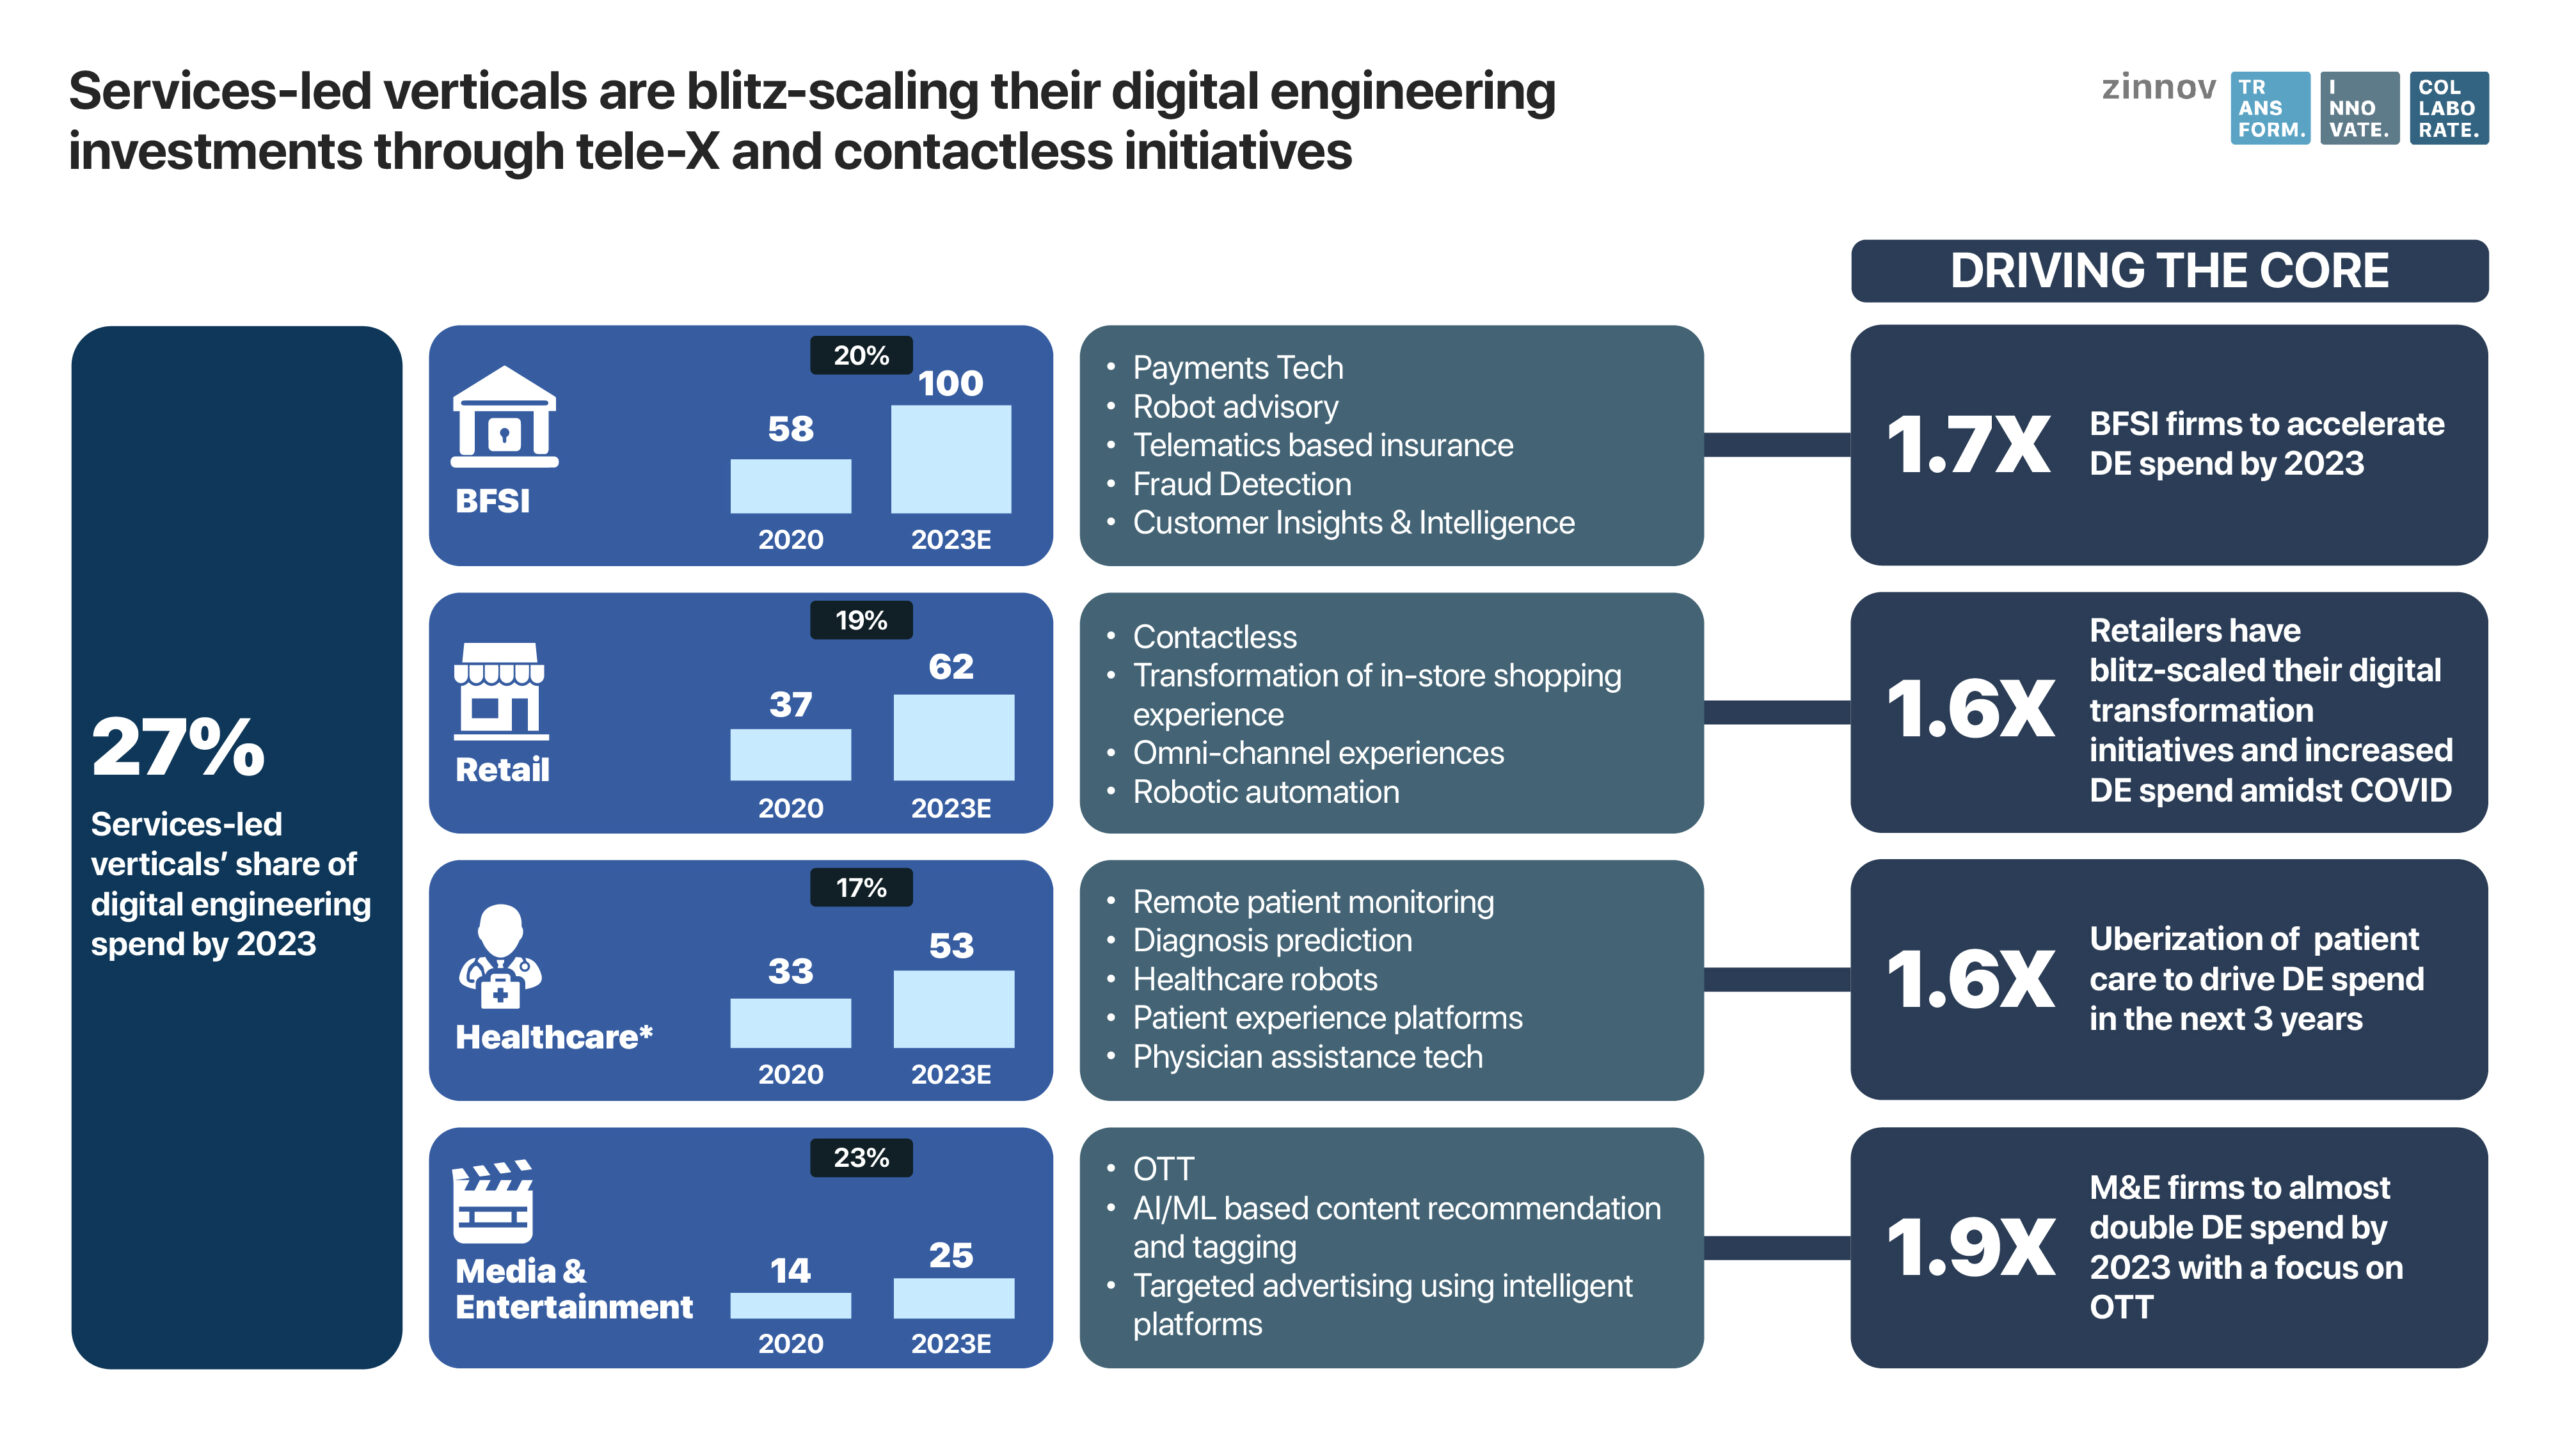 Services-led verticals are providing impetus for future digital engineering spend